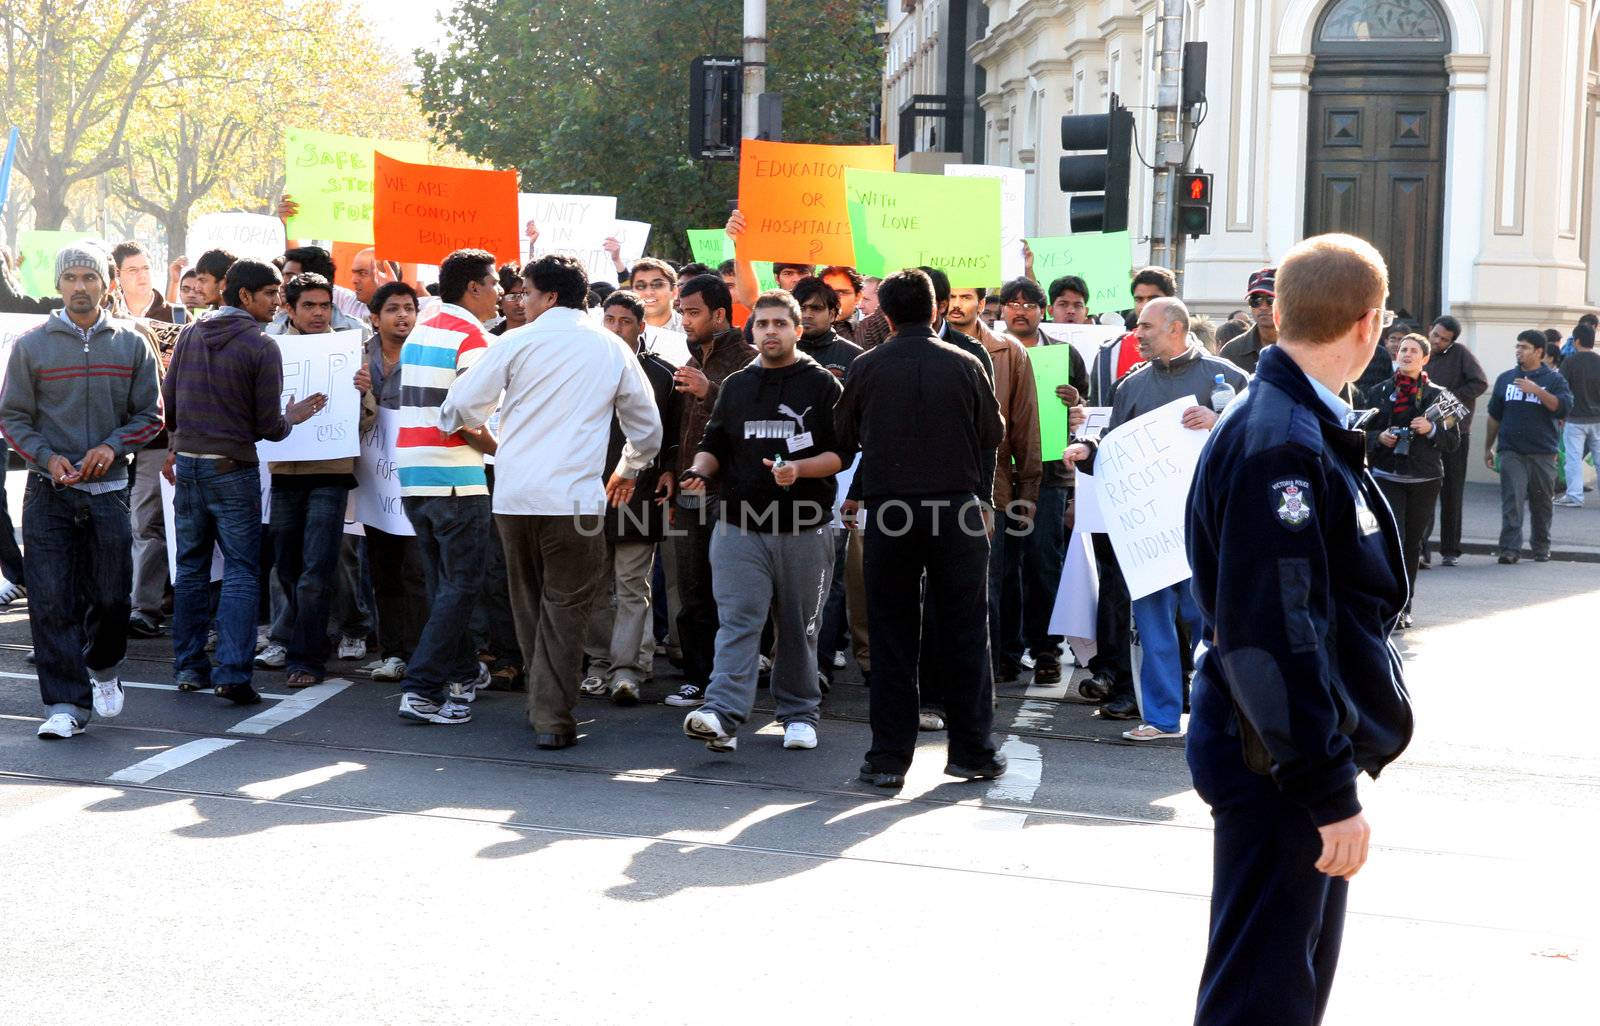 Rally against racism  towards Indian students in melboure (Australia) Date taken: 31st May 2009